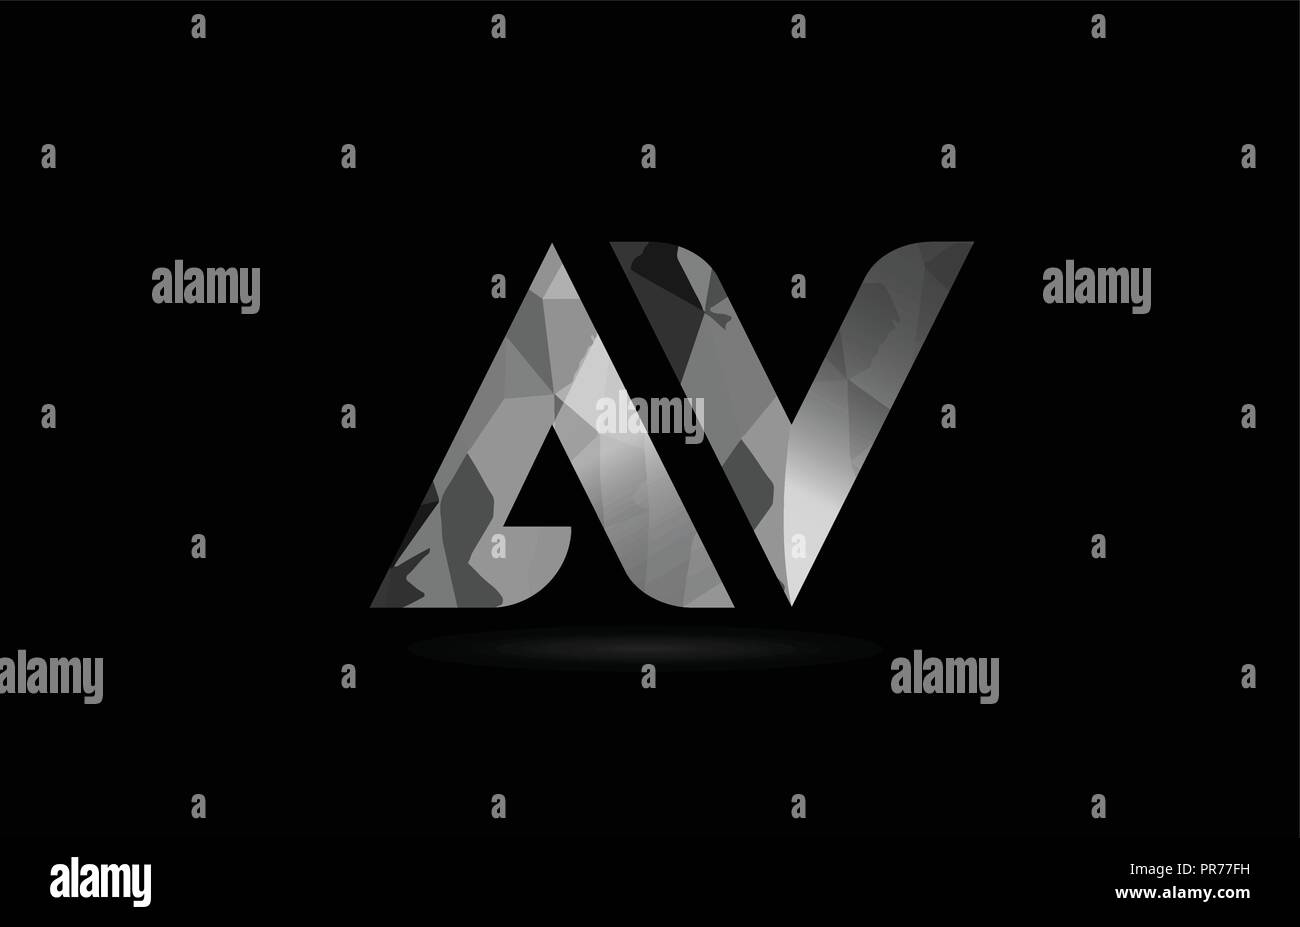 black and white alphabet letter av a v logo combination design suitable for a company or business Stock Vector